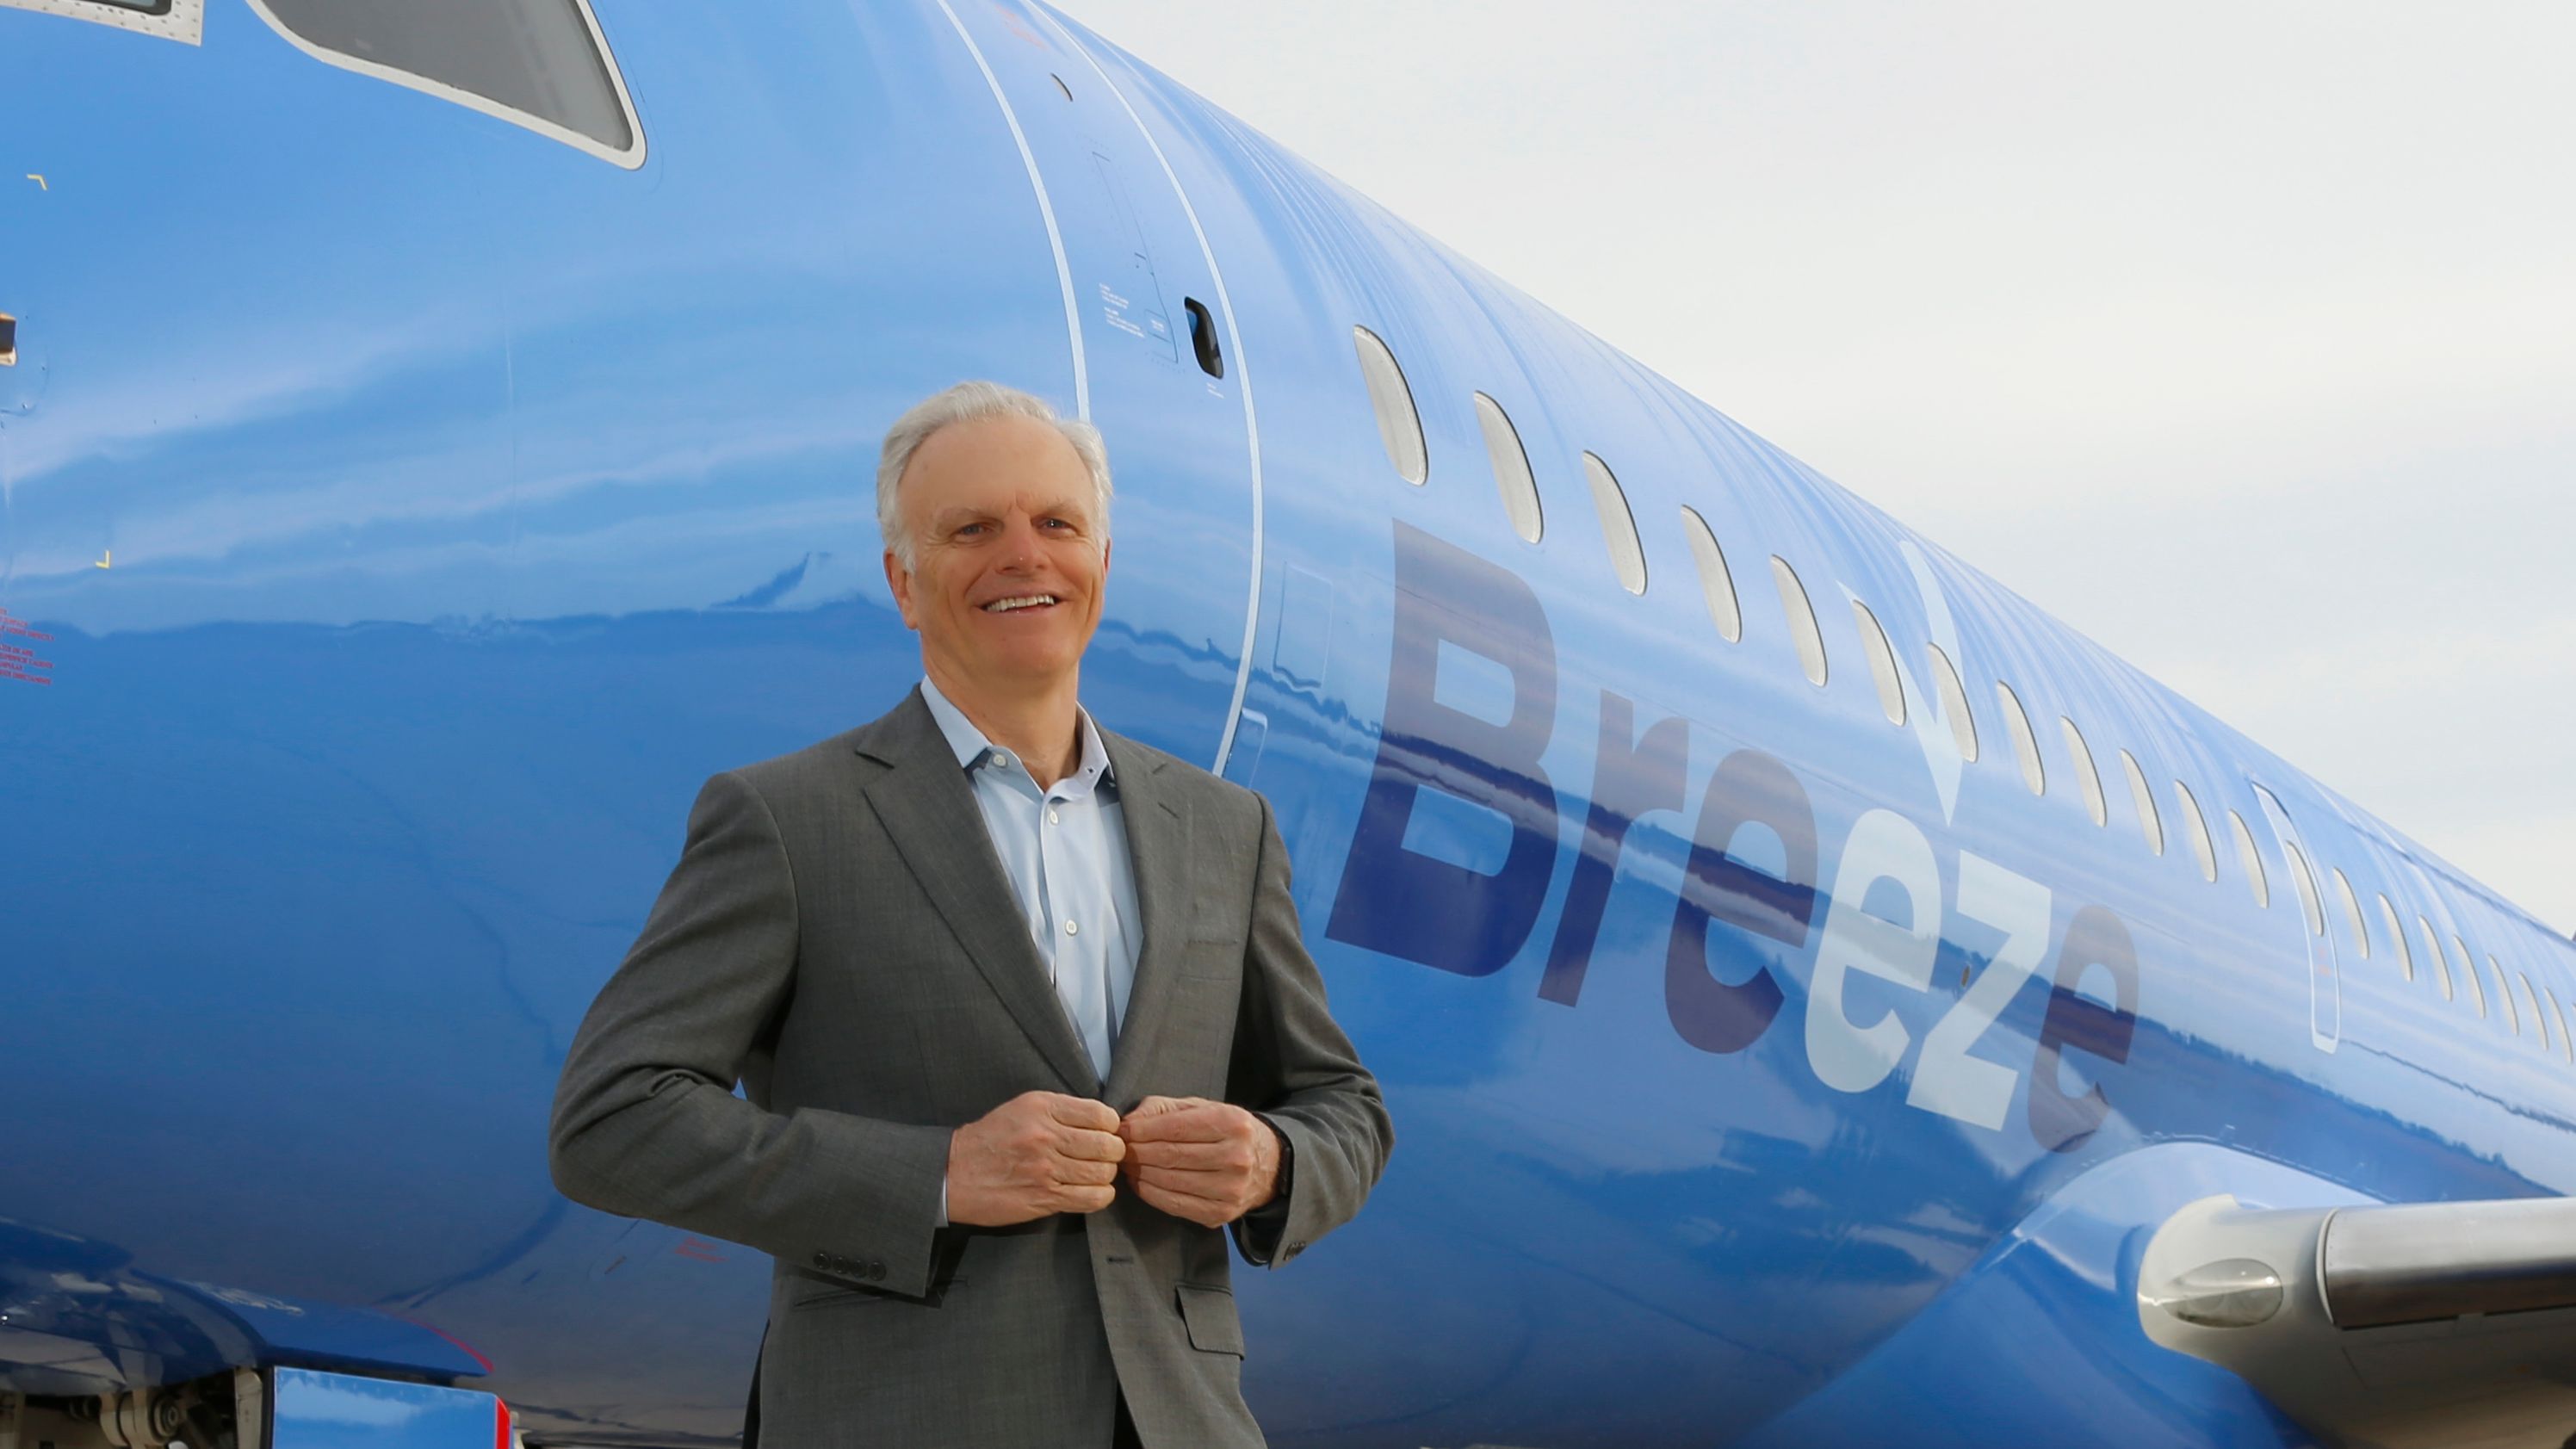 David Neeleman standing in front of a Breeze Airways aircraft.